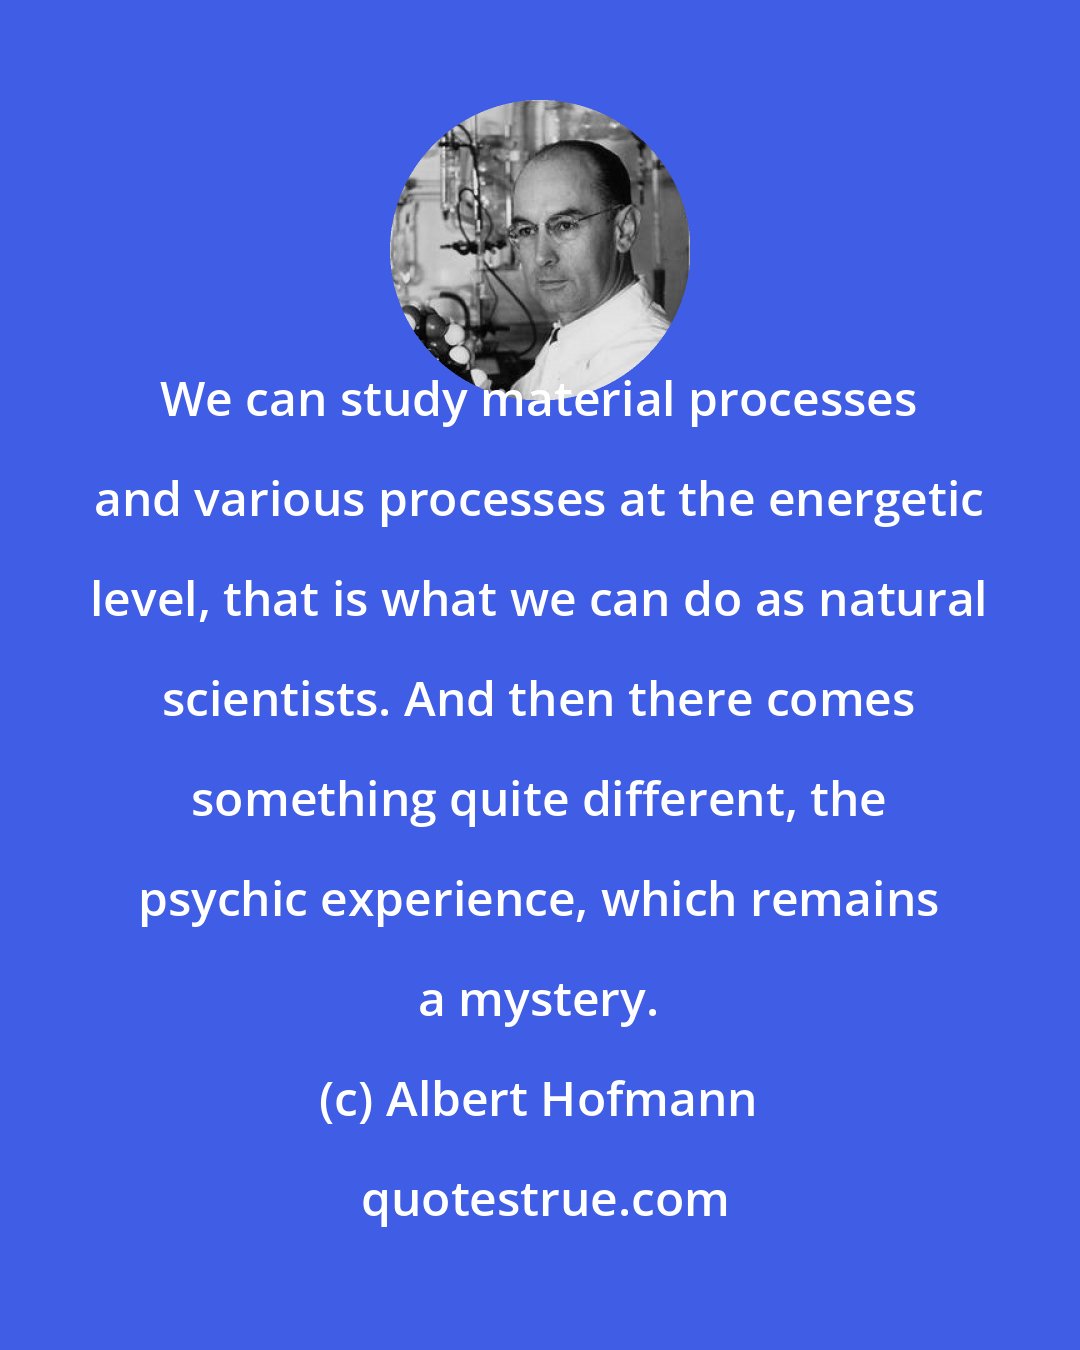 Albert Hofmann: We can study material processes and various processes at the energetic level, that is what we can do as natural scientists. And then there comes something quite different, the psychic experience, which remains a mystery.